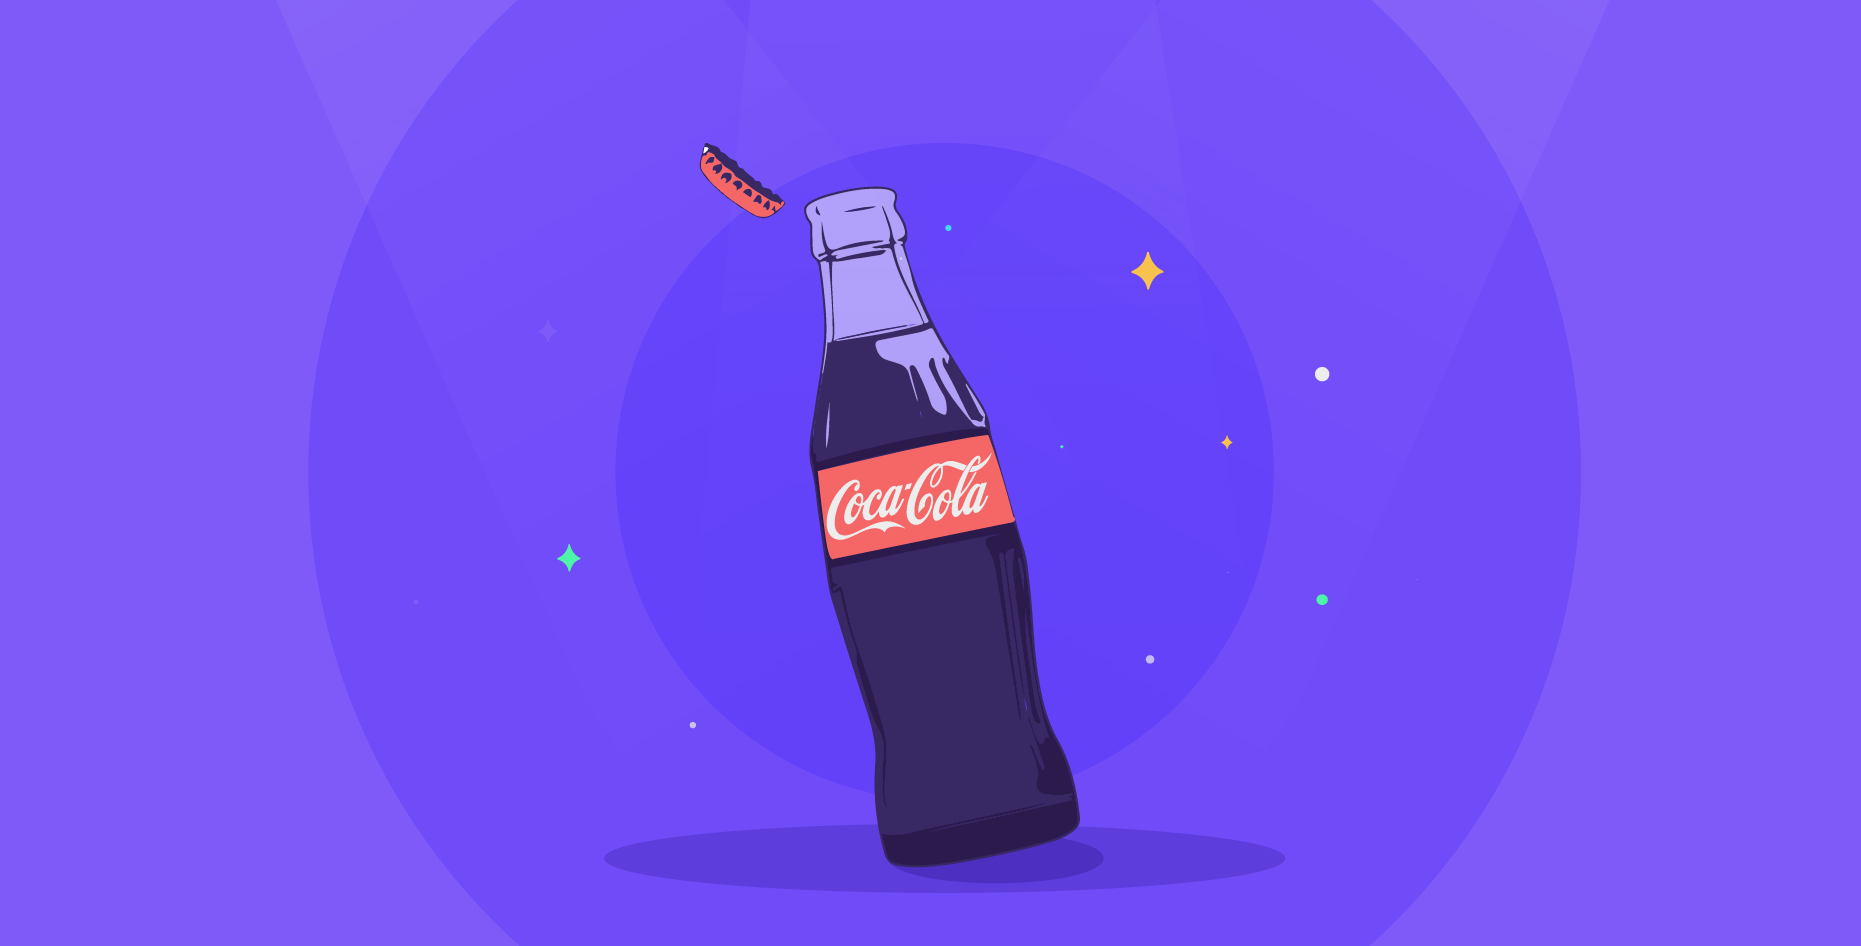 Coca Cola: The branding strategy that made a difference